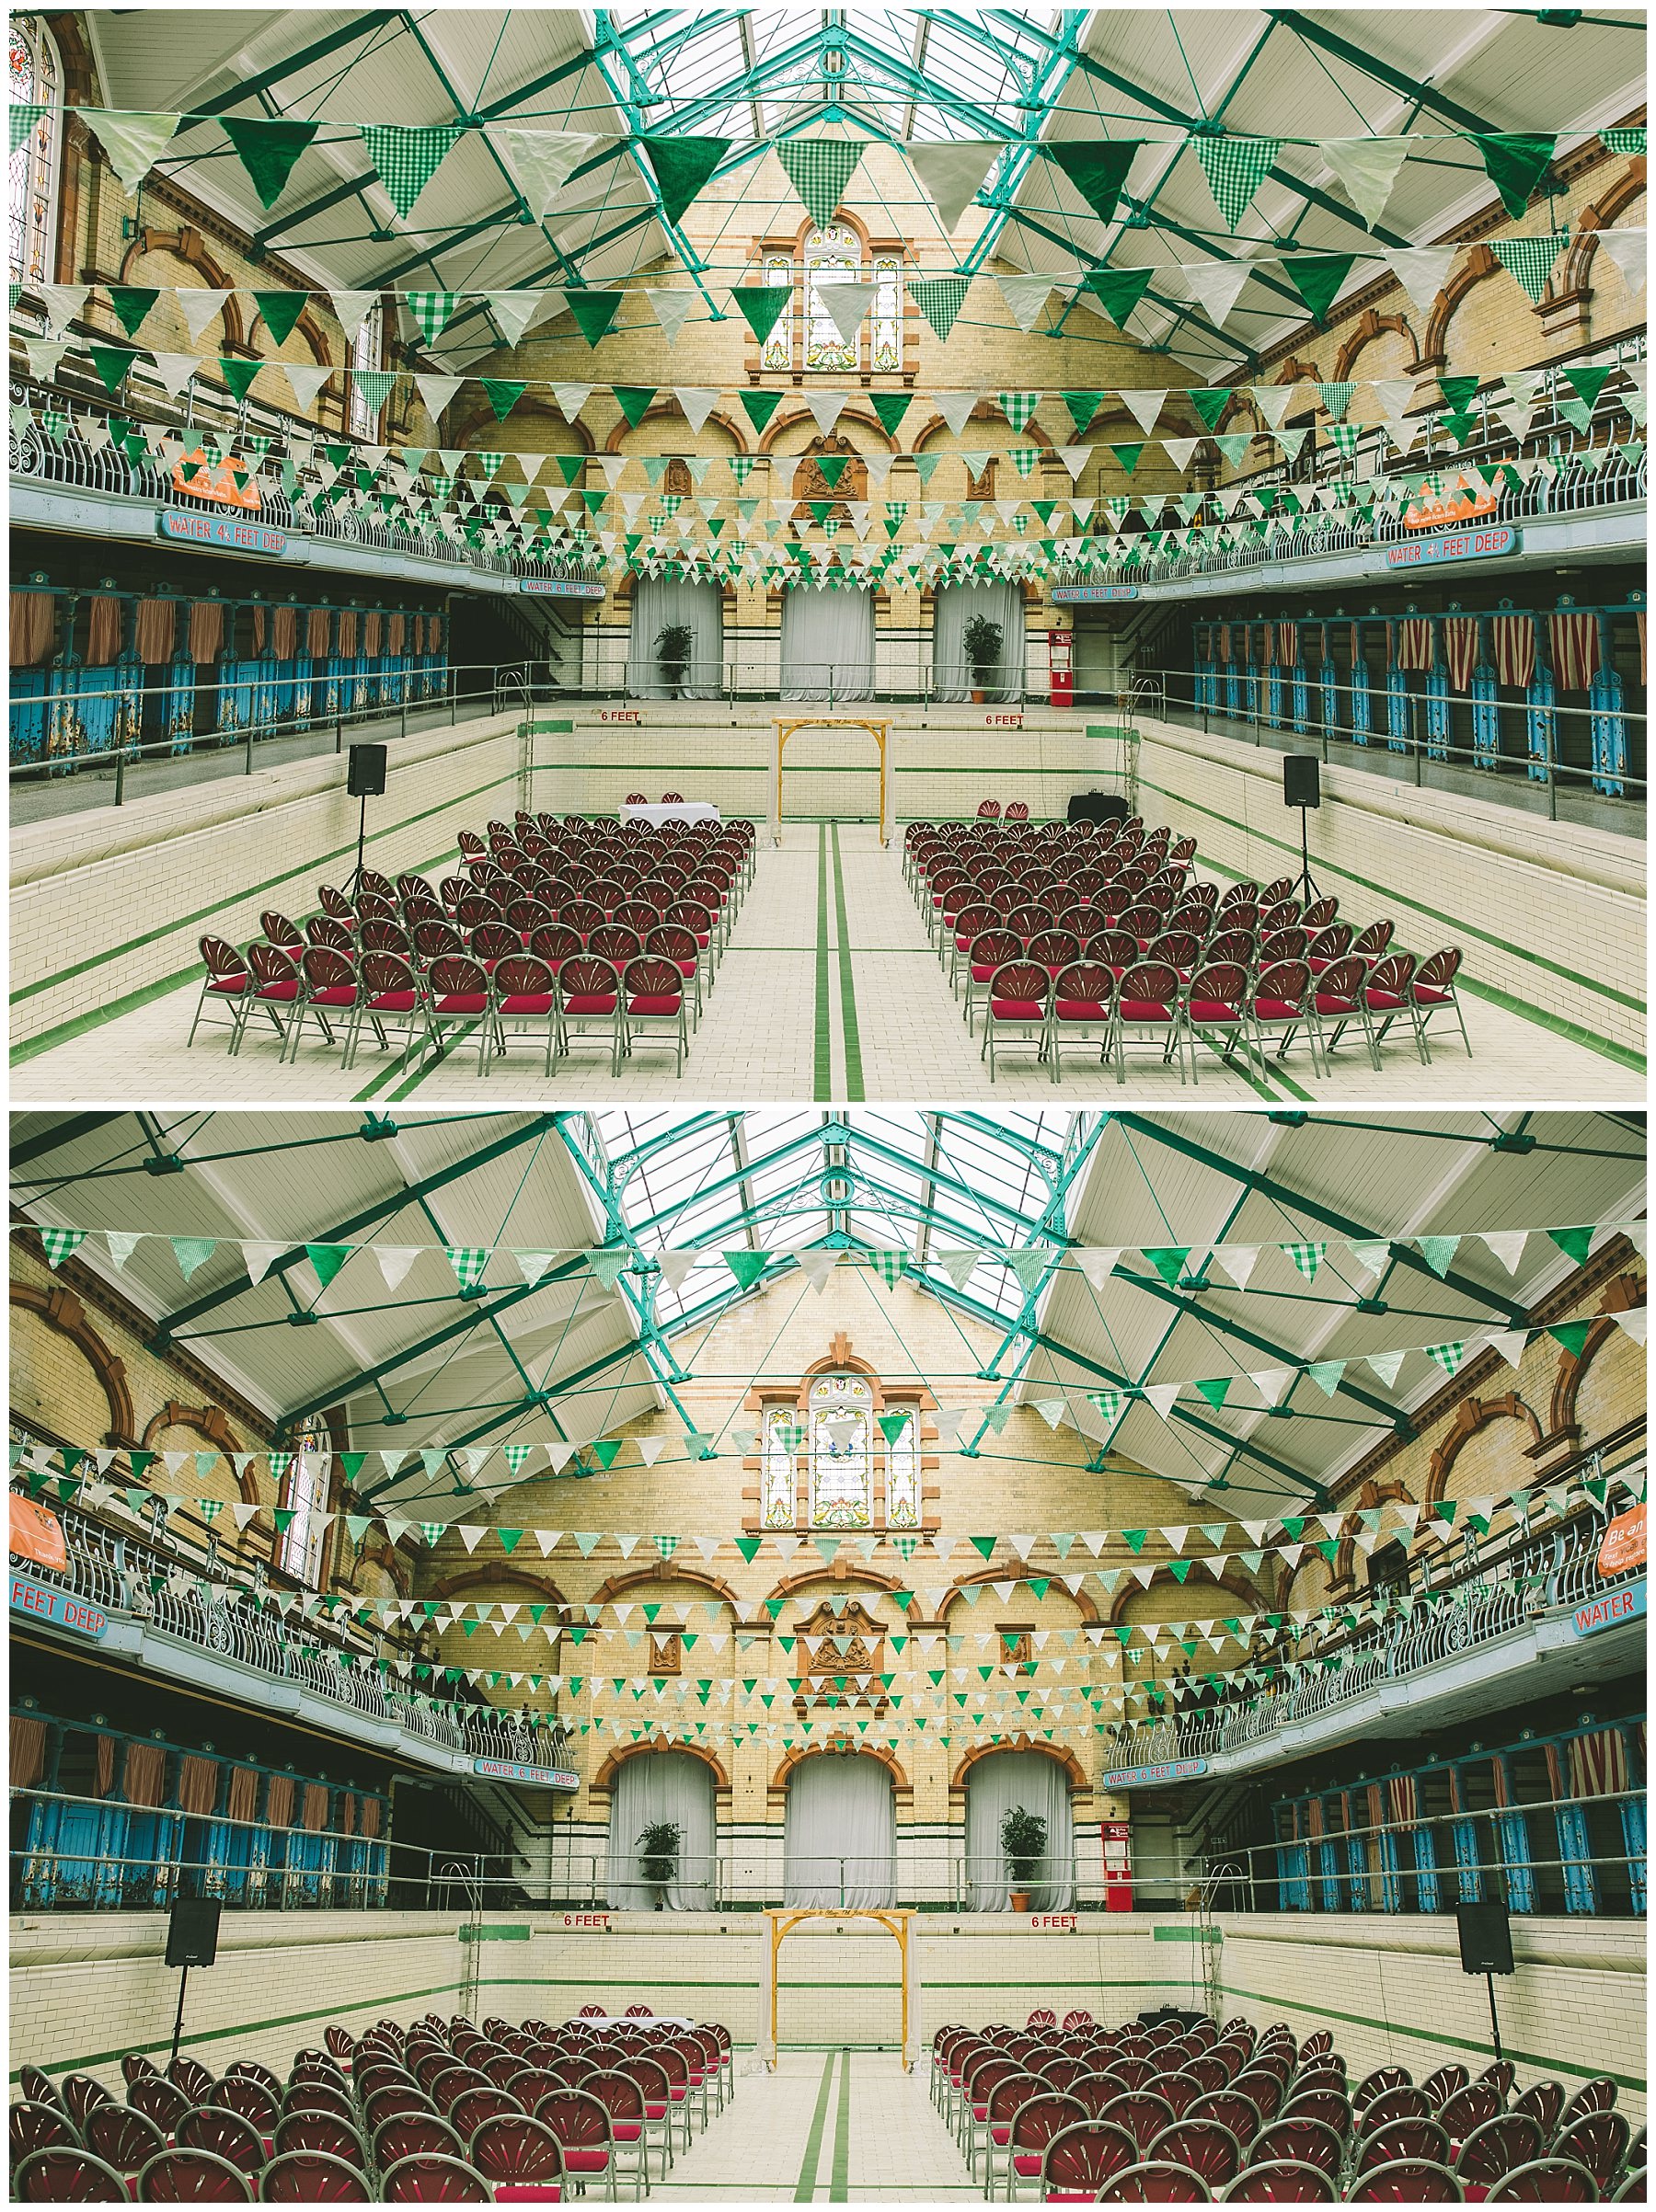 Ceremony set up in the pool at Victoria Baths